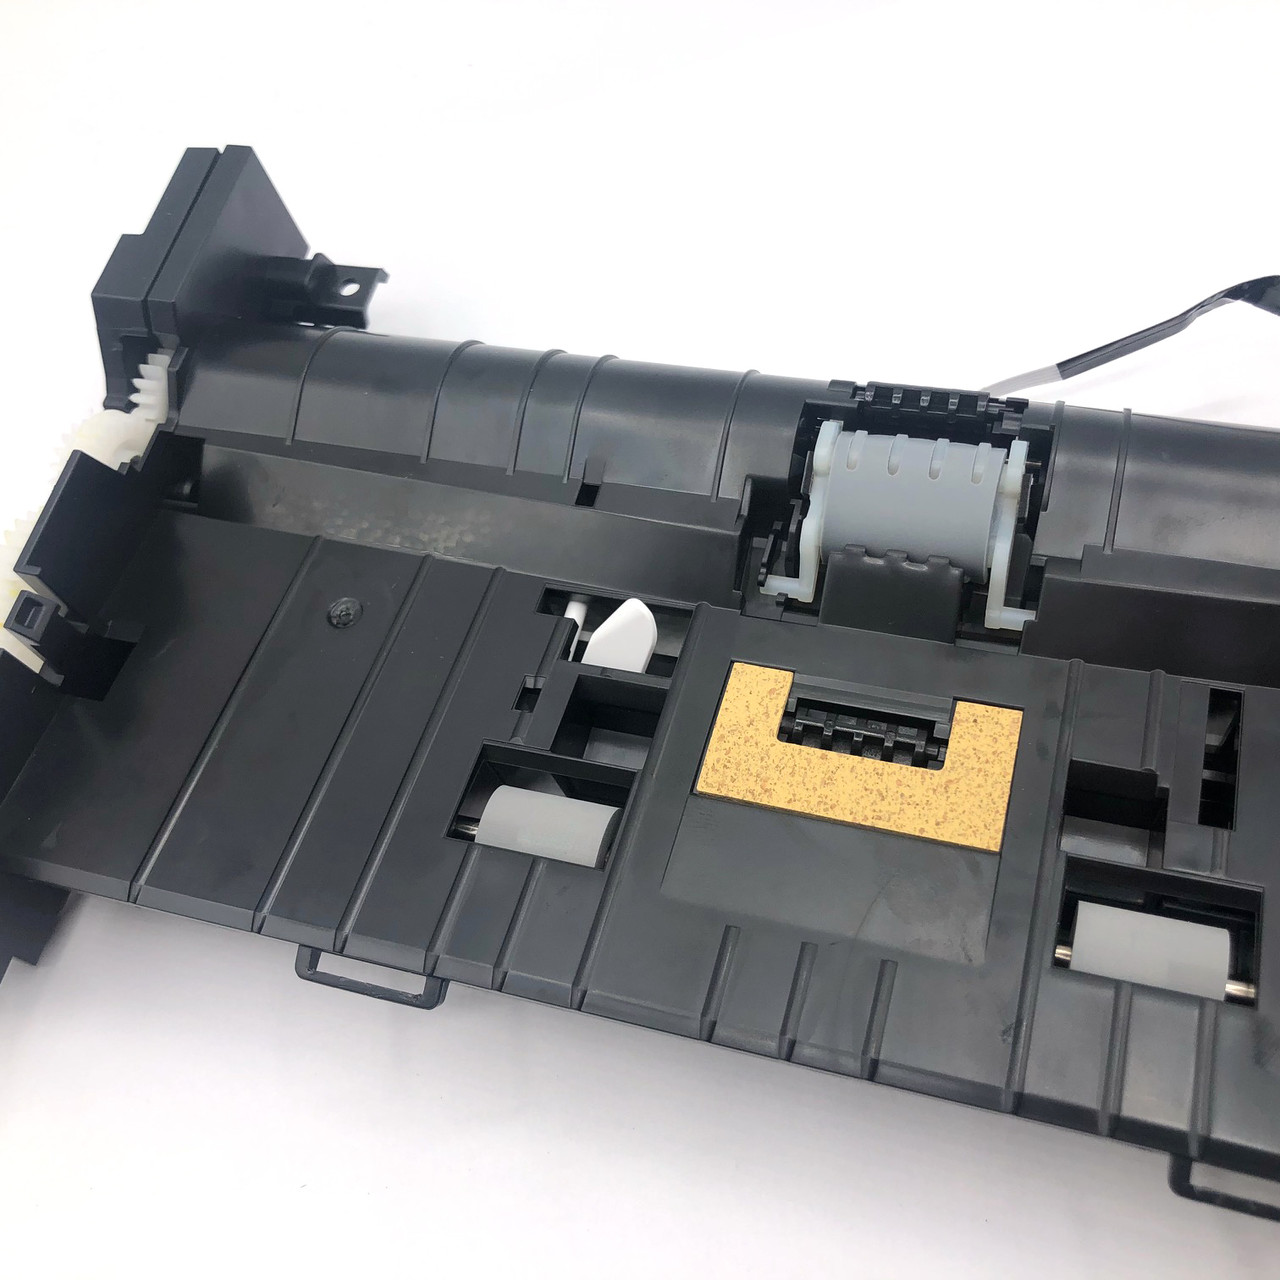 NOT RETURNABLE 1MR66 40079 Scanner ADF Automatic Document Feeder Assembly